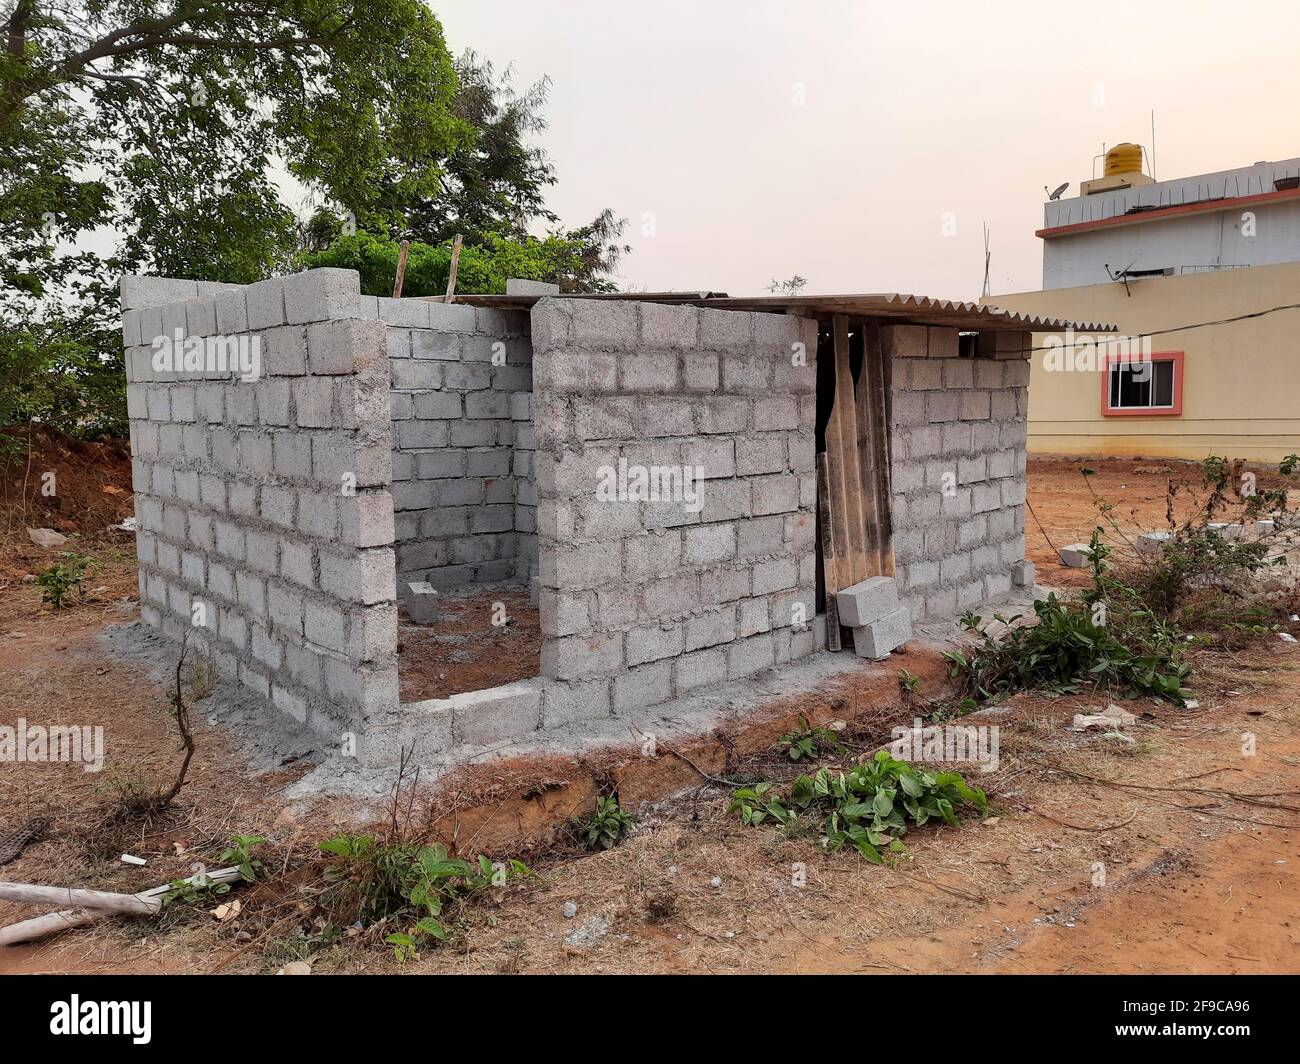 Construction of a small new house in a rural area Stock Photo - Alamy